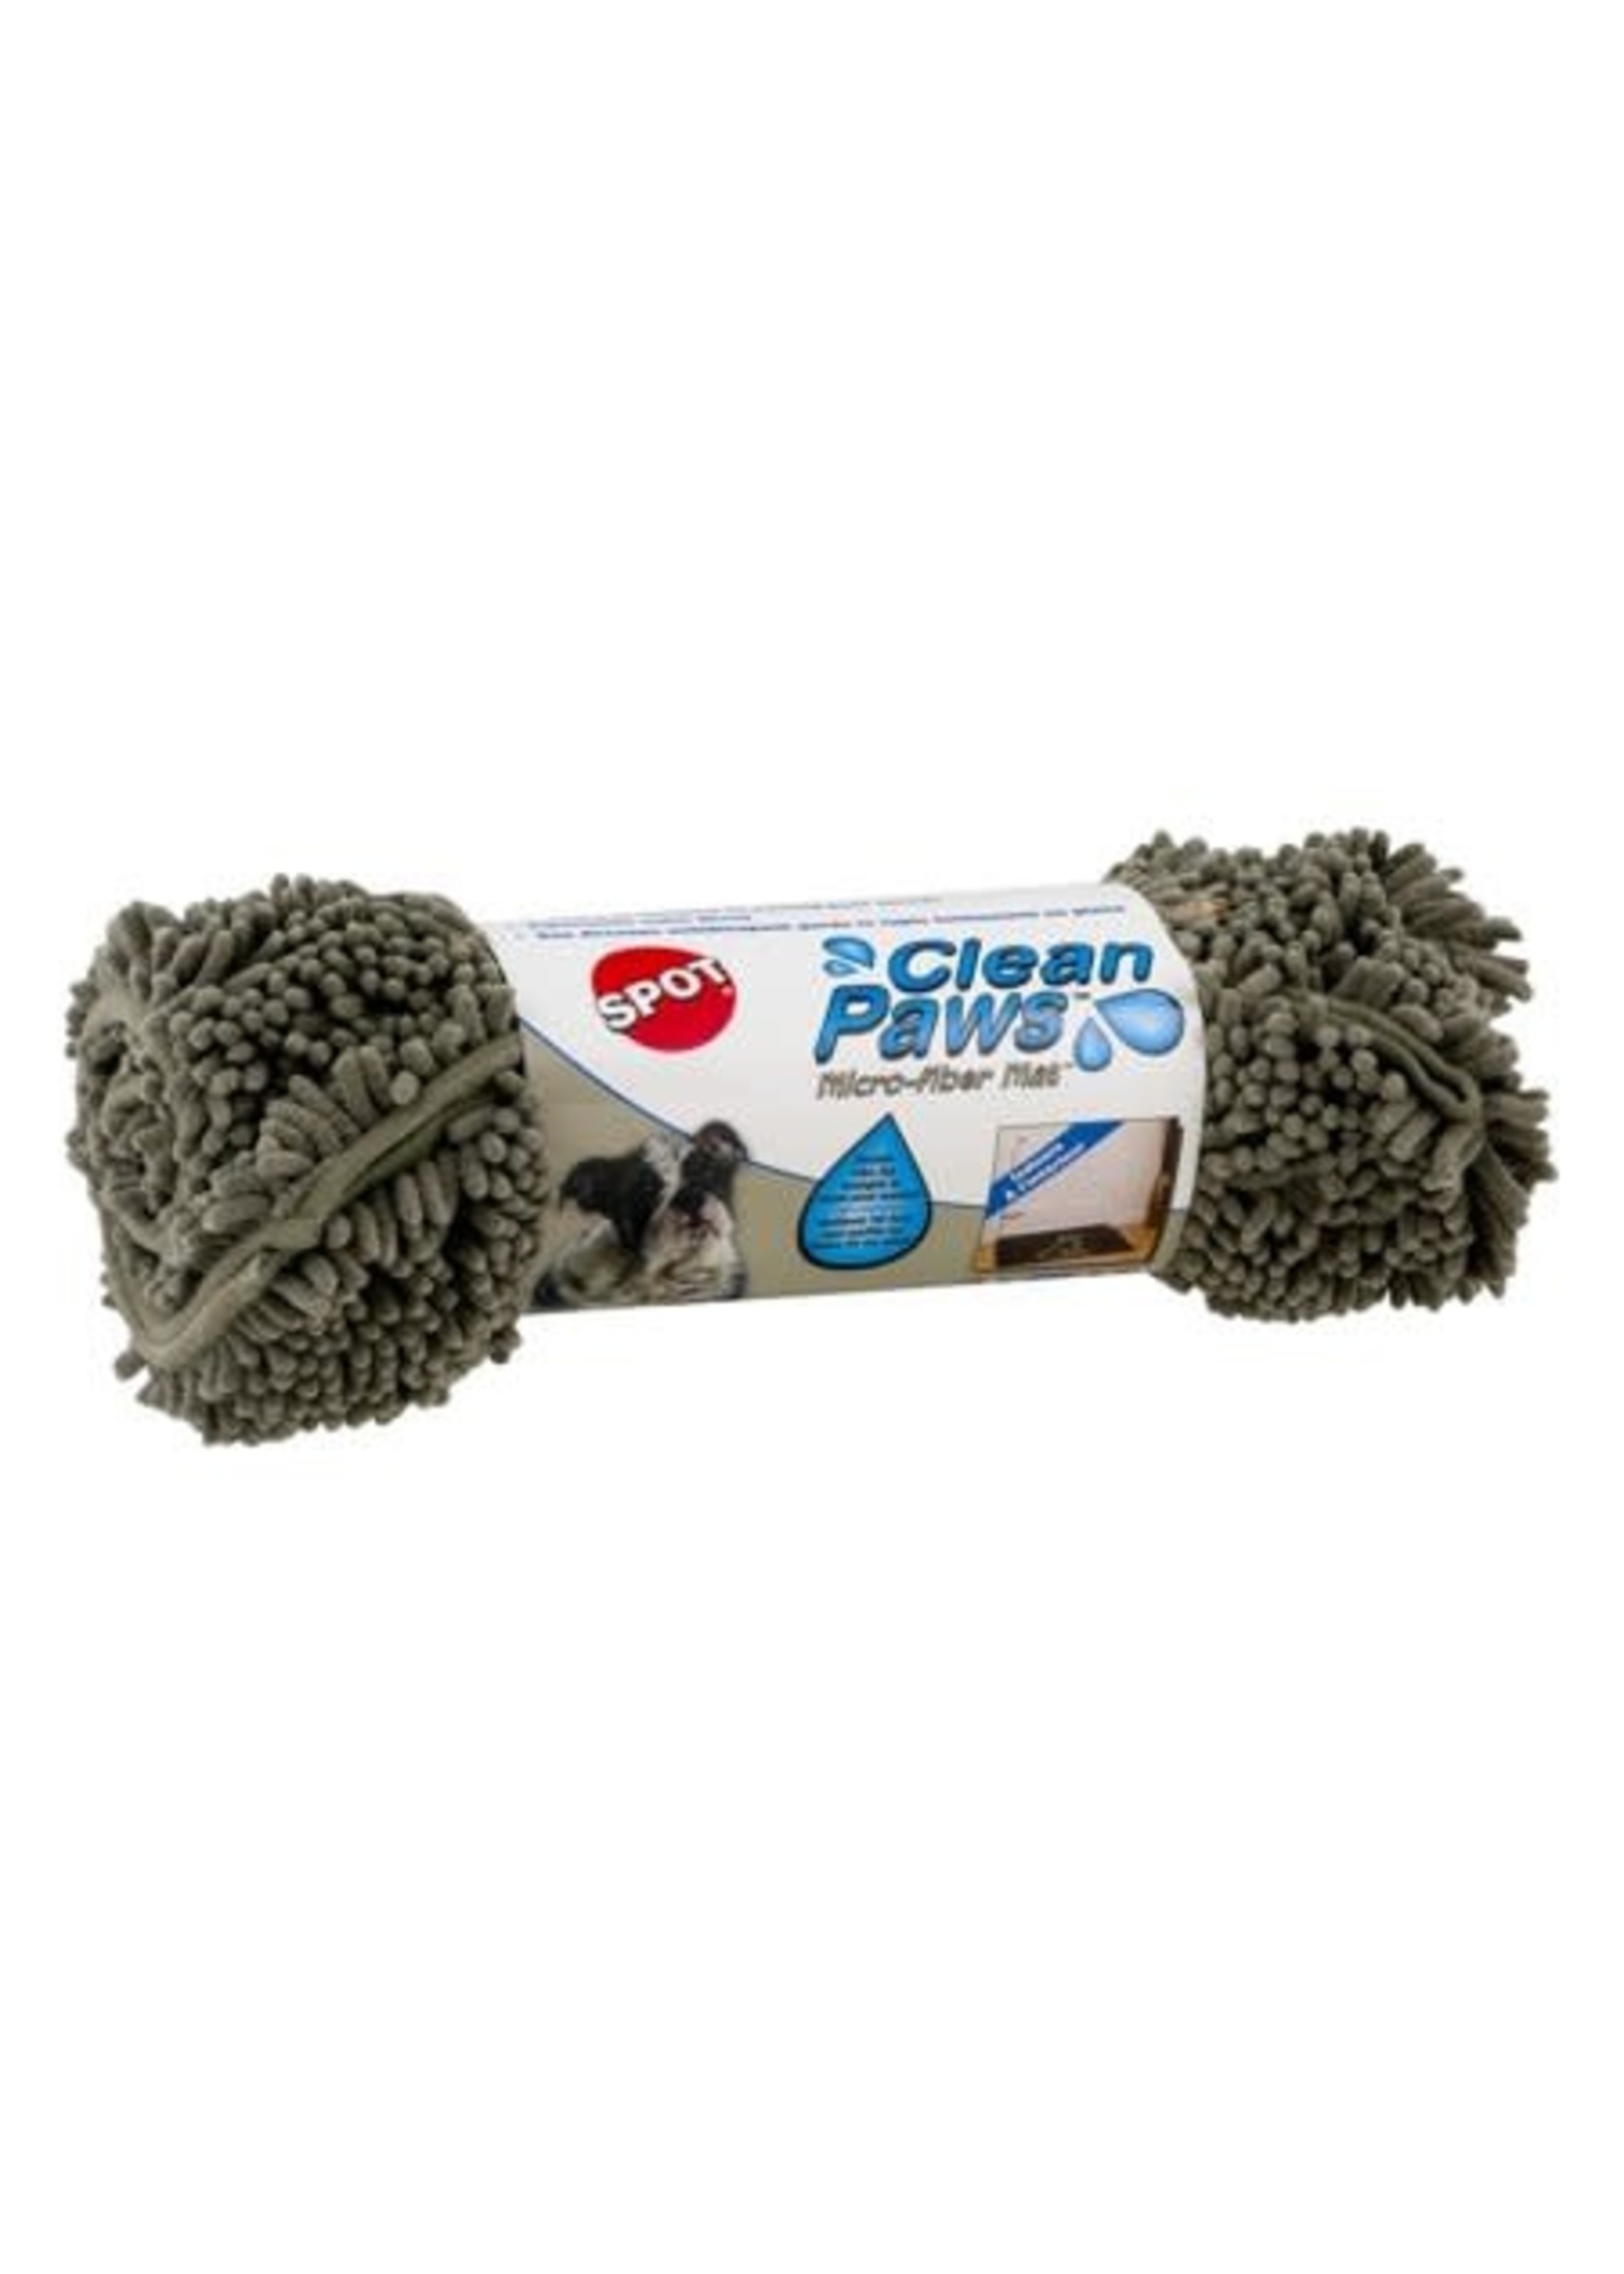 Ethical Products, Inc. Spot Clean Paws 31"x20" Micro-Fiber Mat in Sage